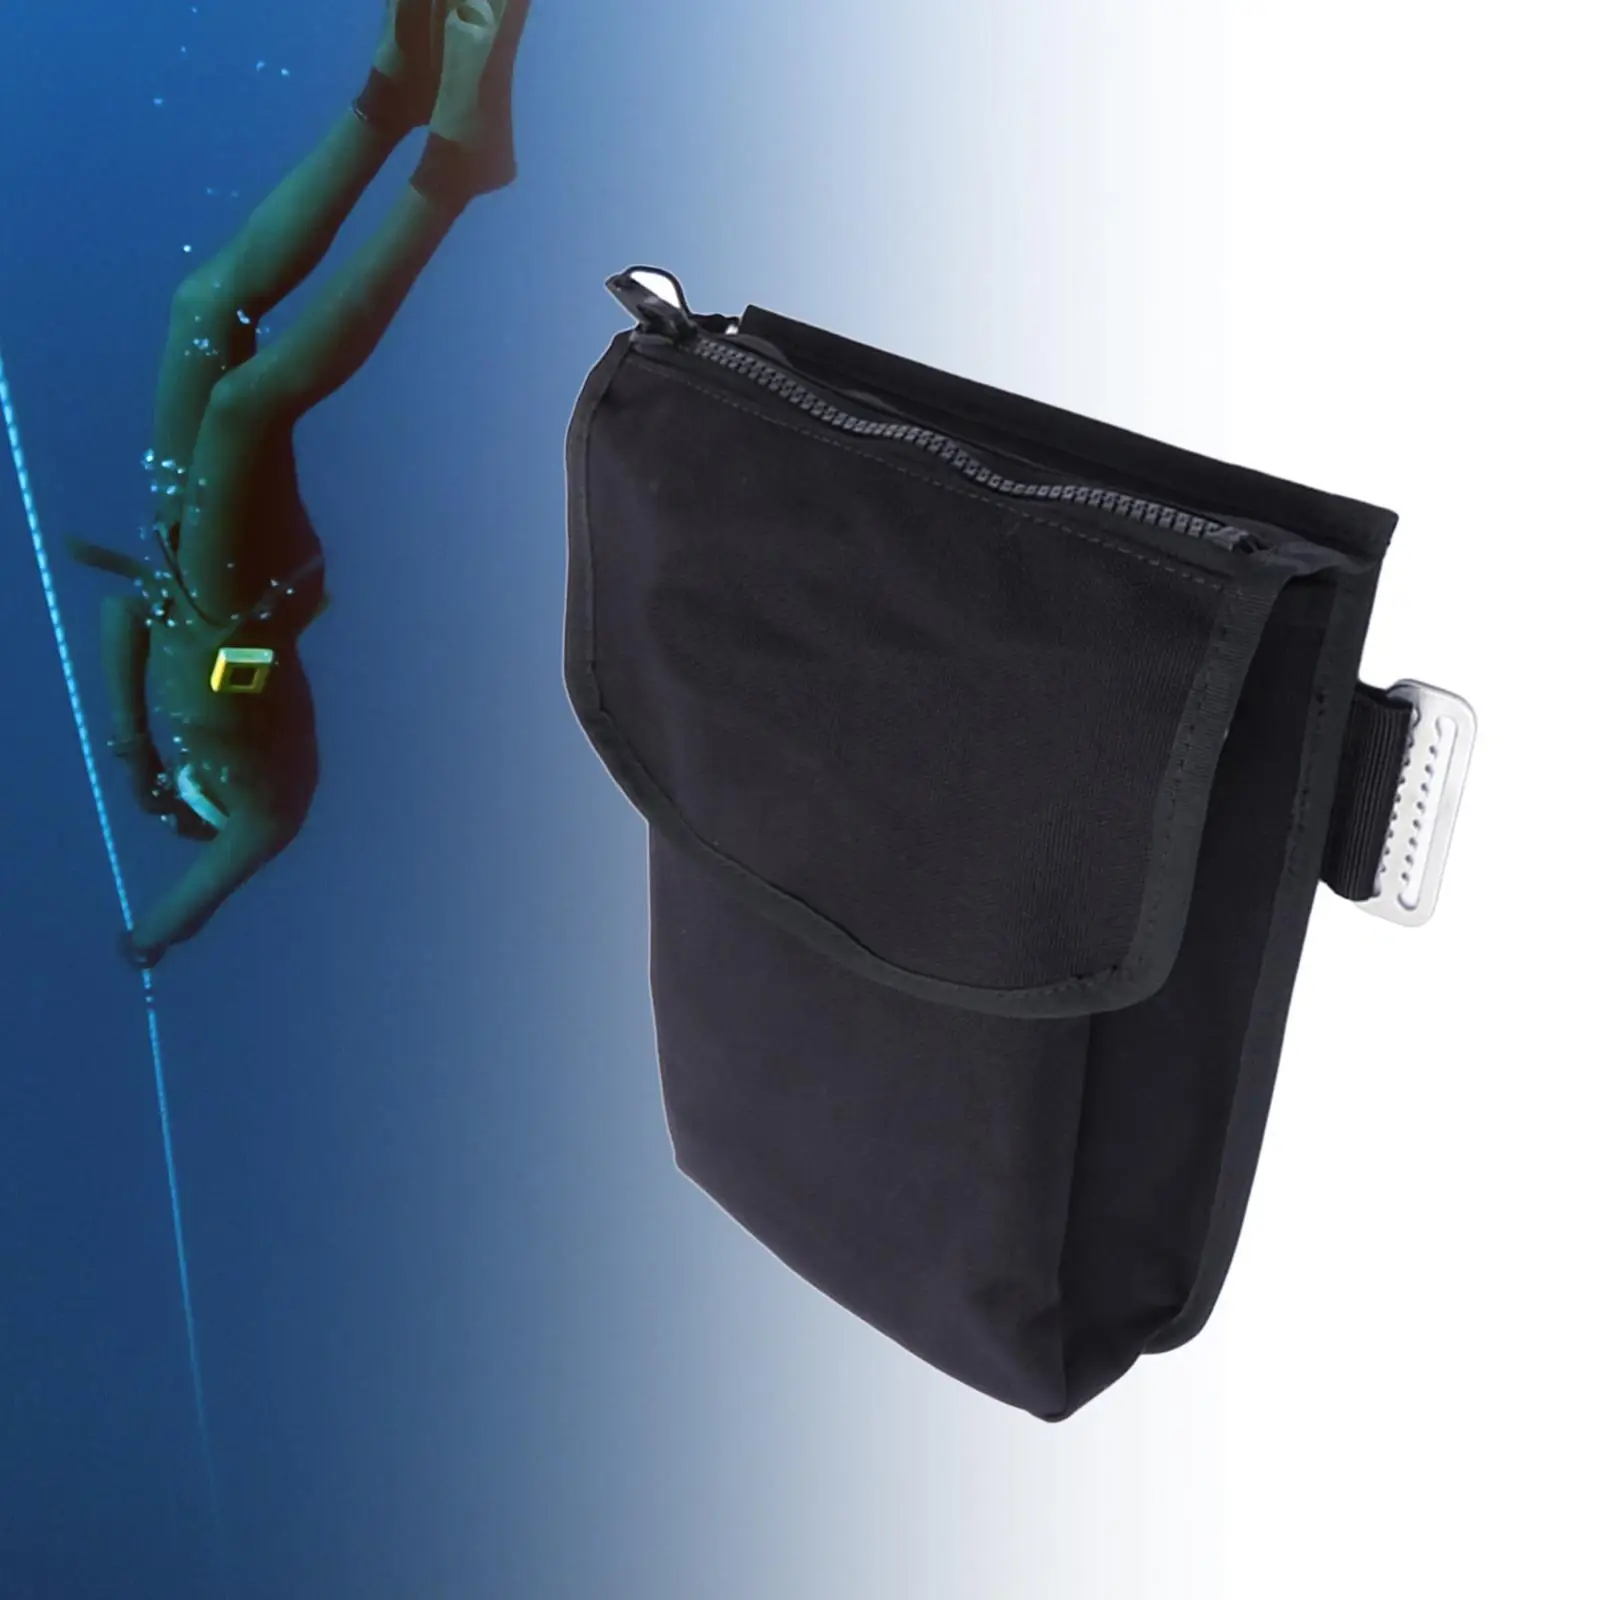 Scuba Diving Thigh Pocket Carrying Bag Storage Pocket Carry Pouch Snorkeling Equipment Holder Weight Pocket for Underwater Black